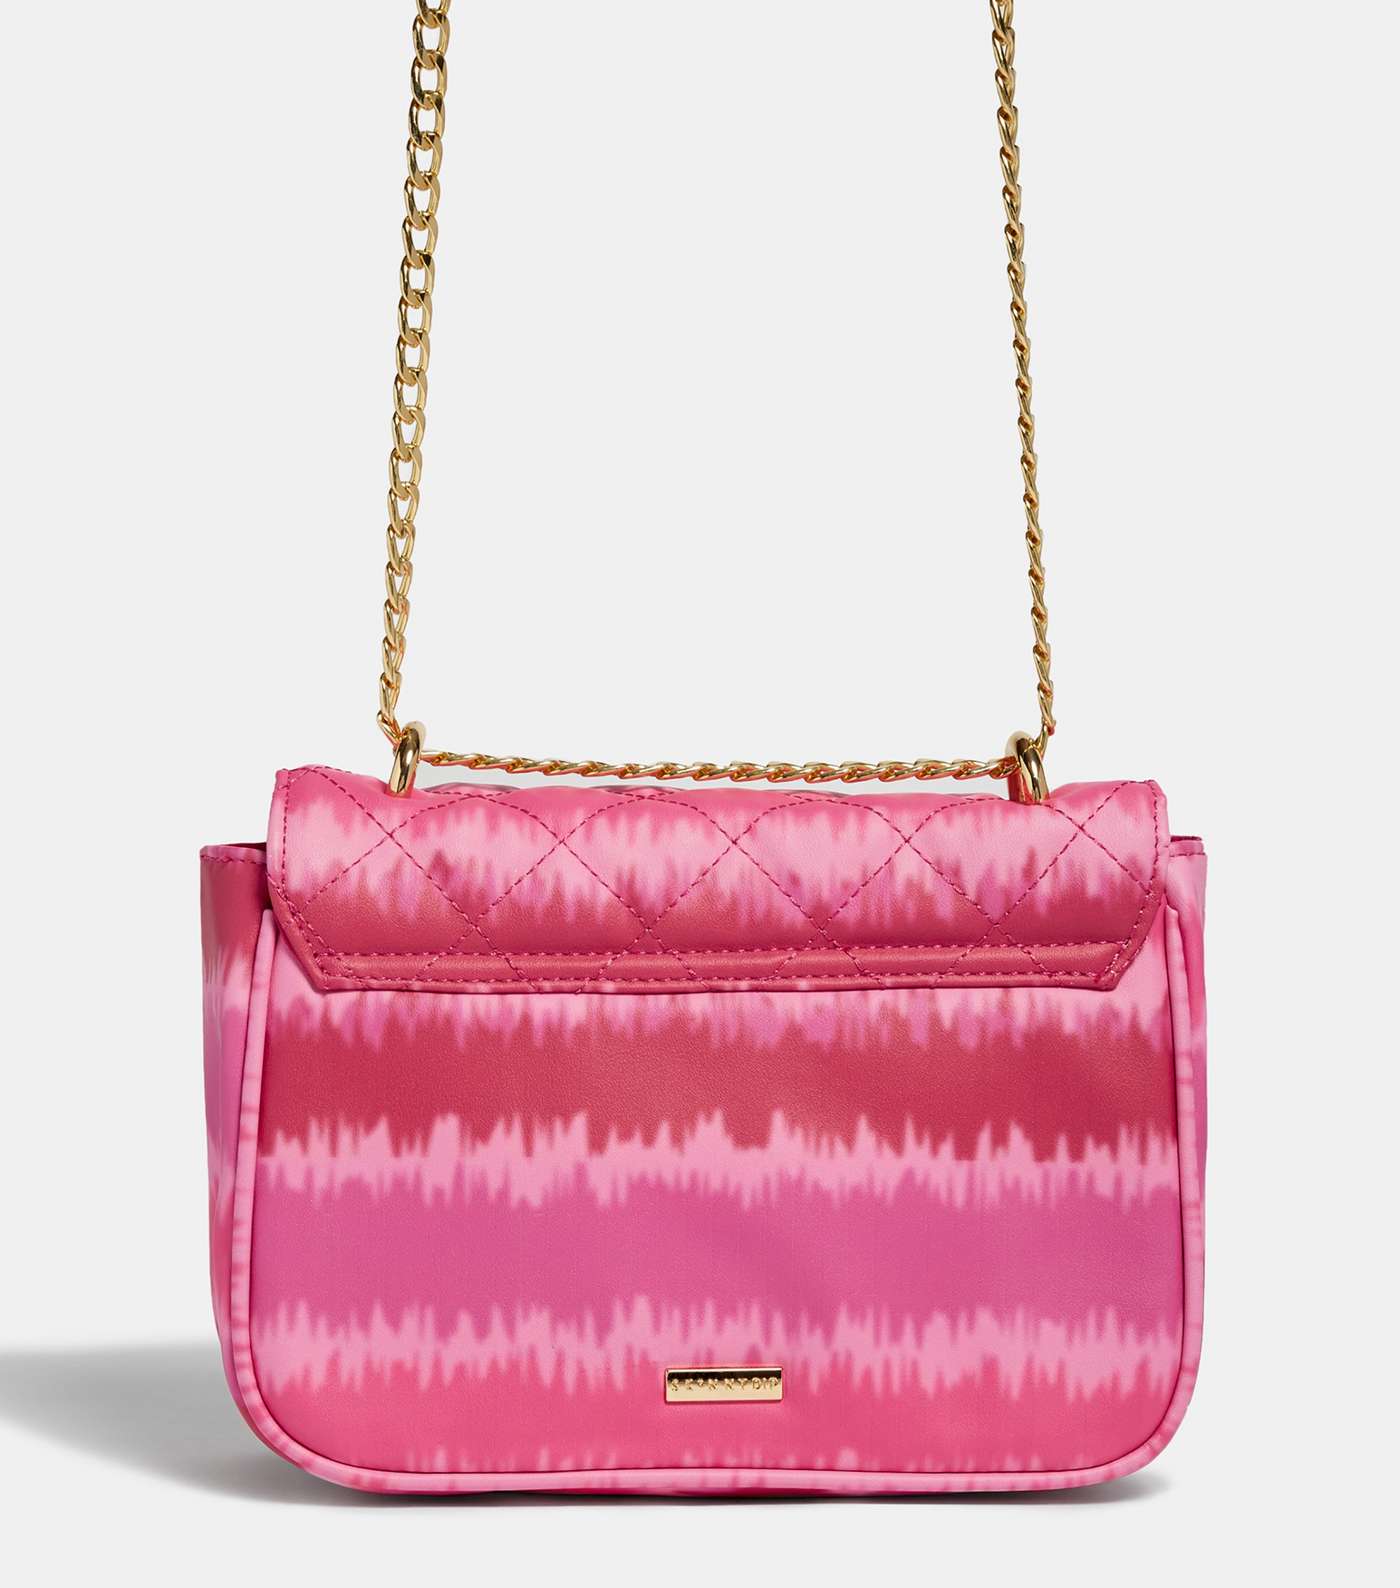 Skinnydip Pink Leather-Look Ombré Cross Body Bag Image 4